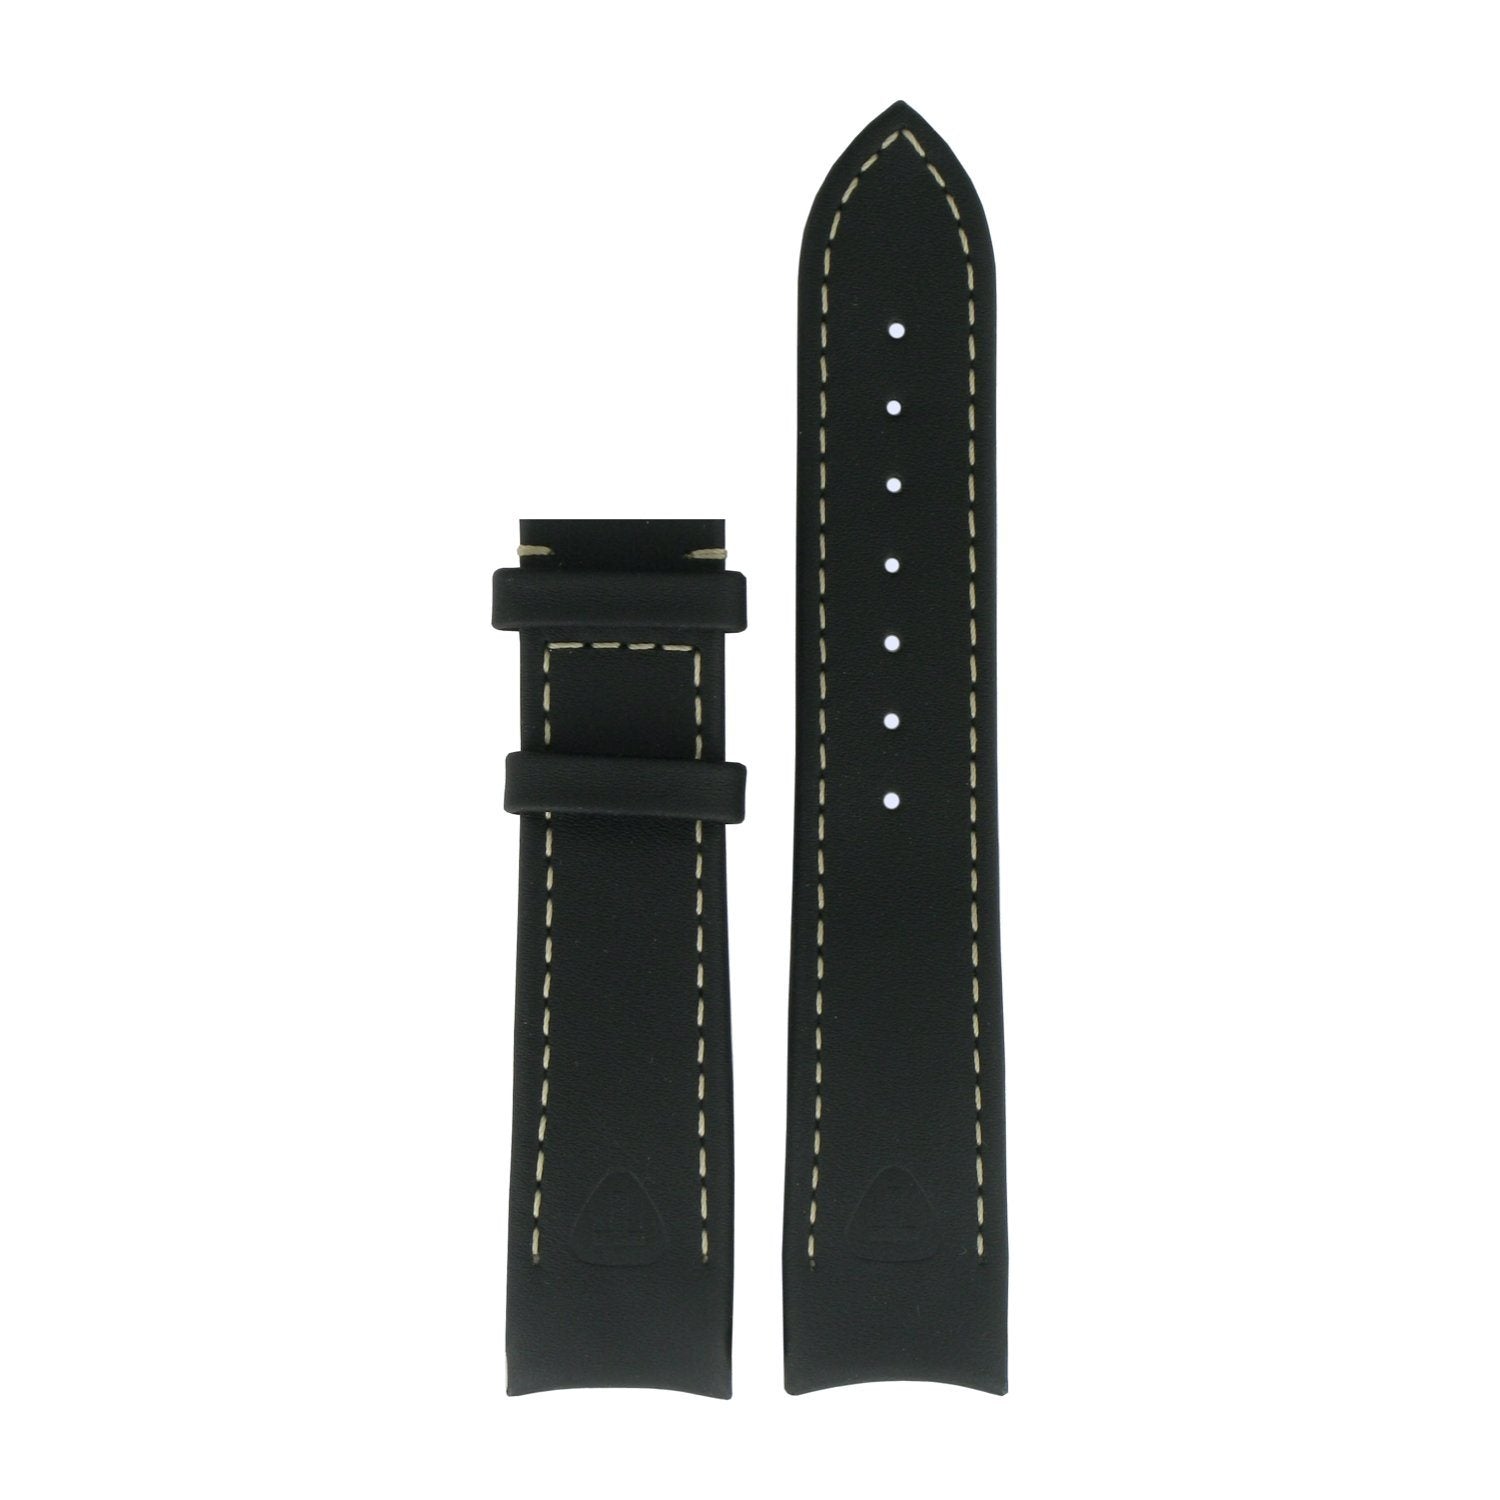 Genuine Tissot 20mm Silen-T Black Leather Strap without Buckle by Tissot